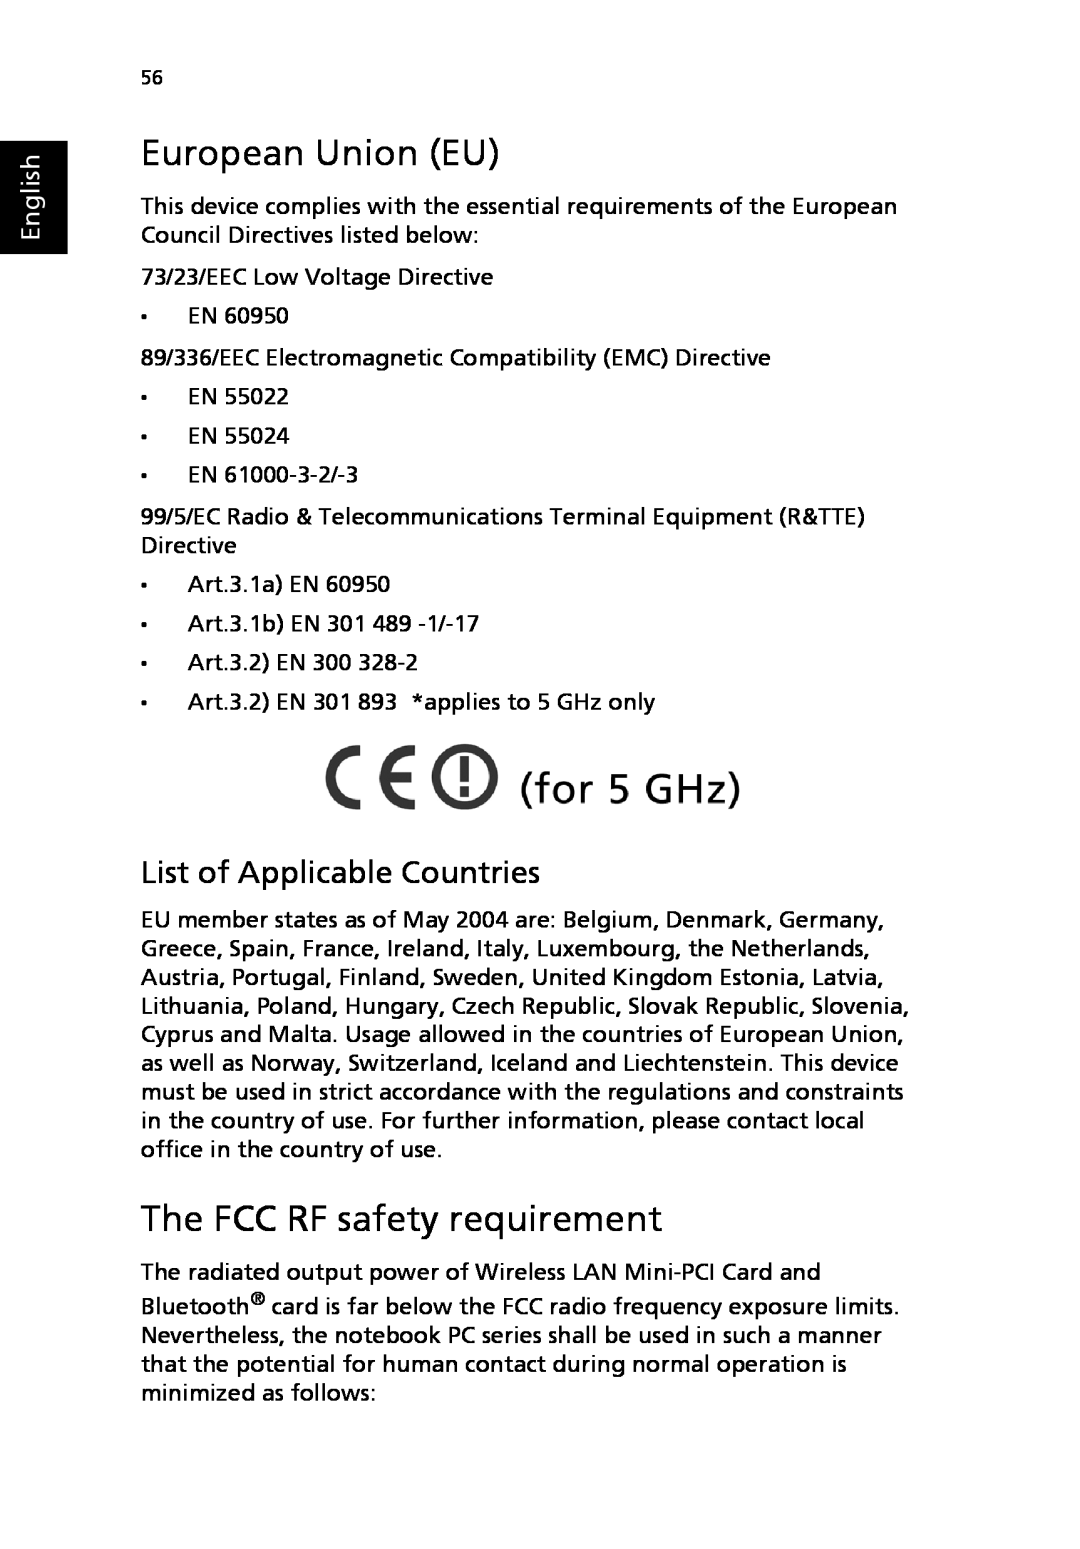 Acer 2310 Series manual European Union EU, The FCC RF safety requirement, List of Applicable Countries, English 